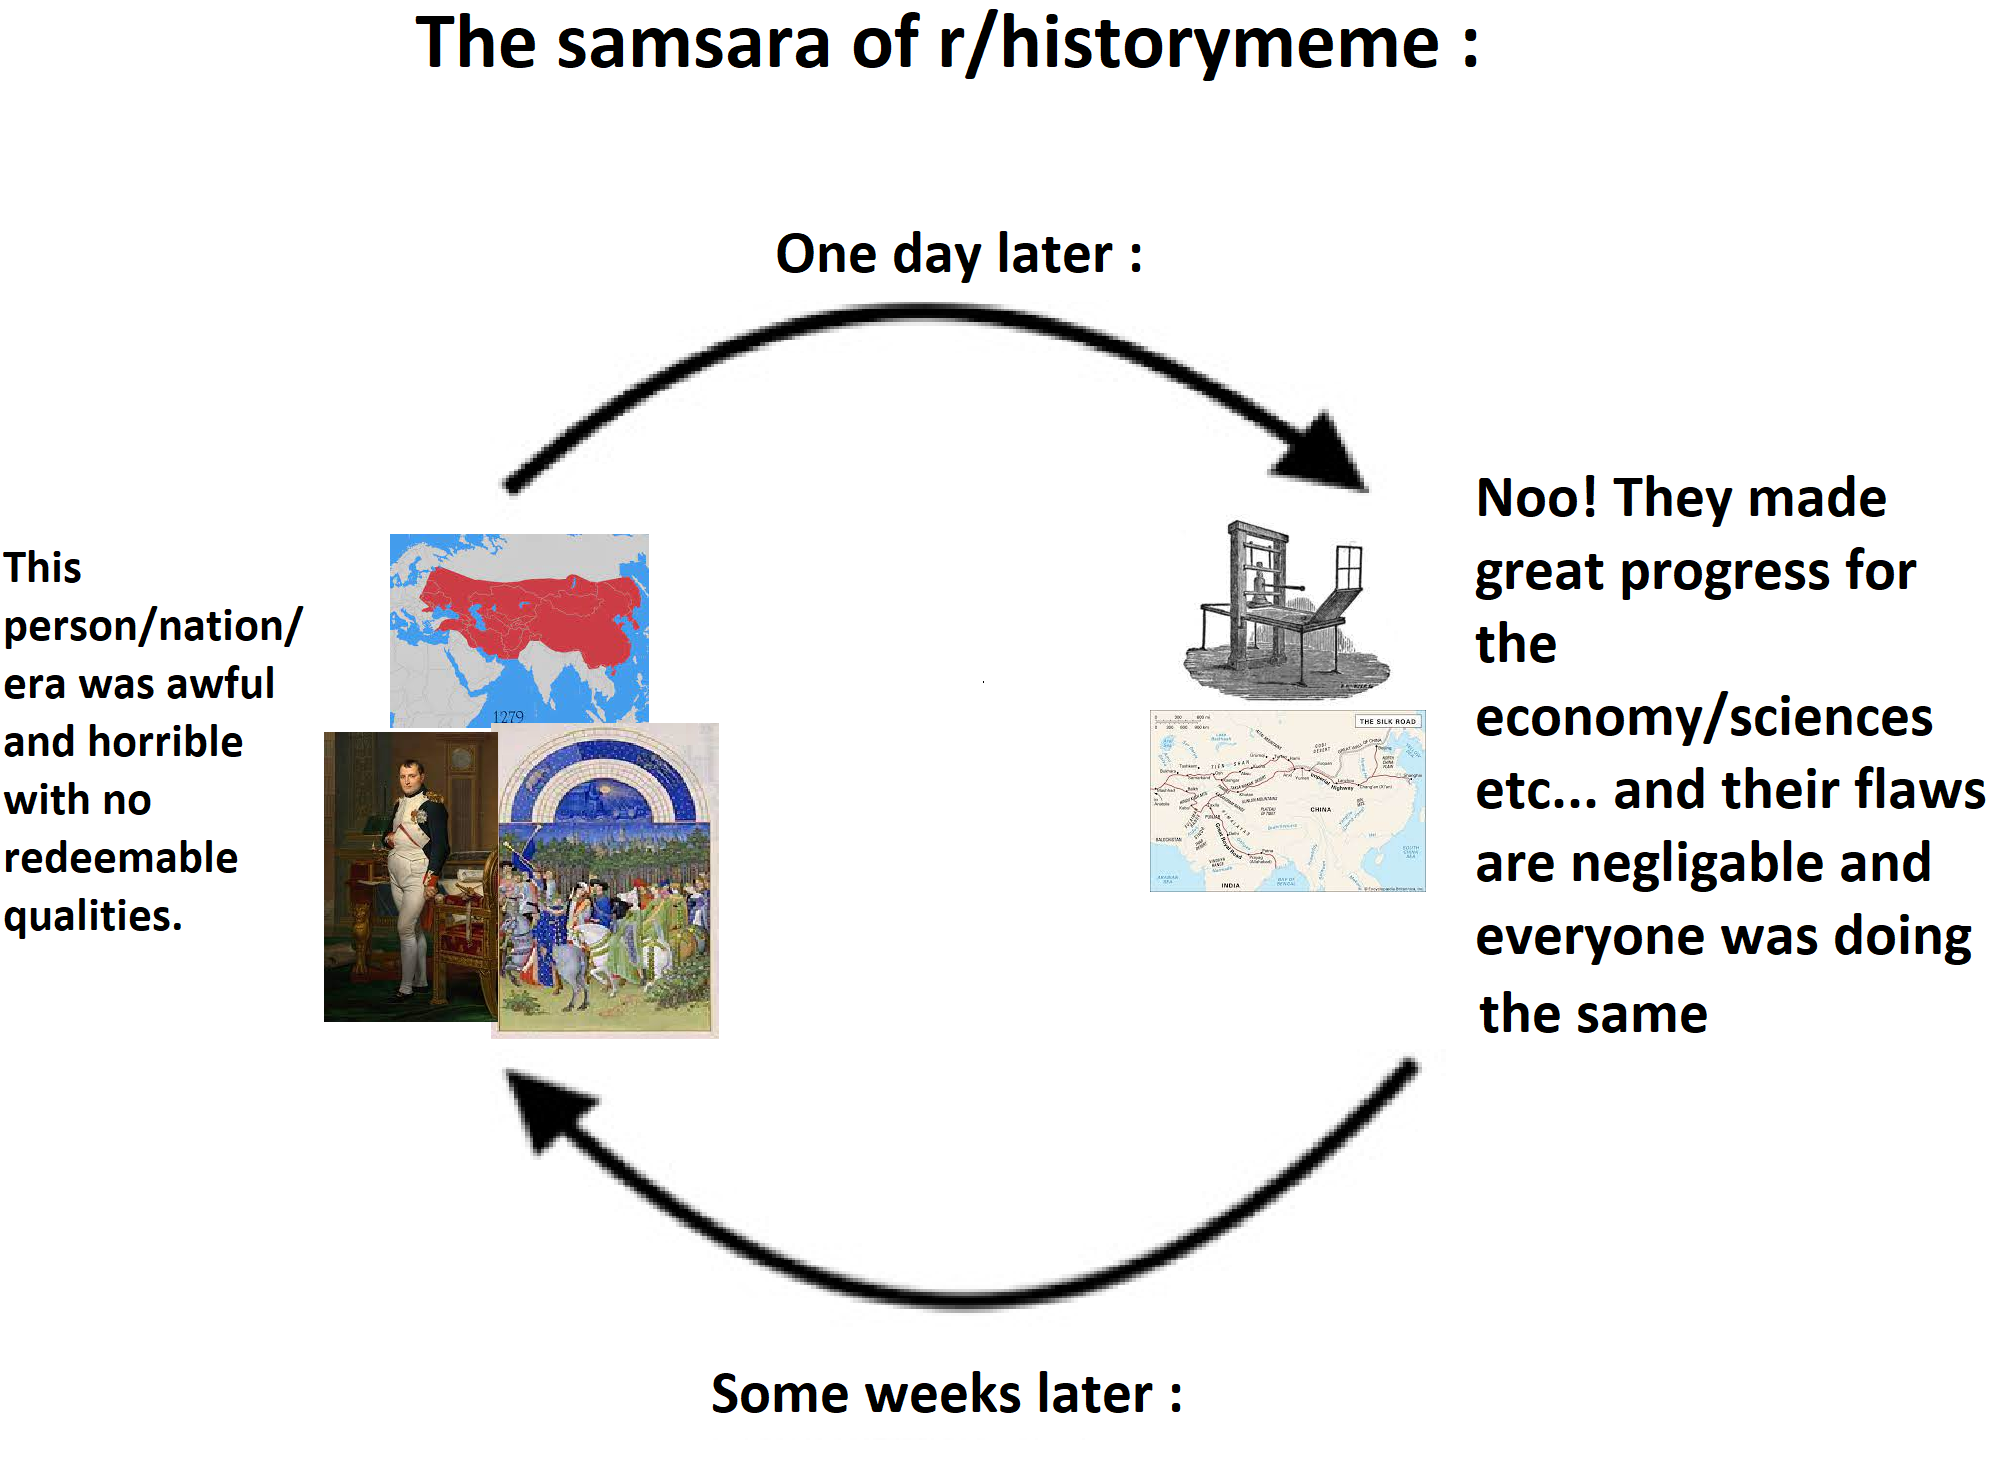 History may not repeat itself but memes sure does